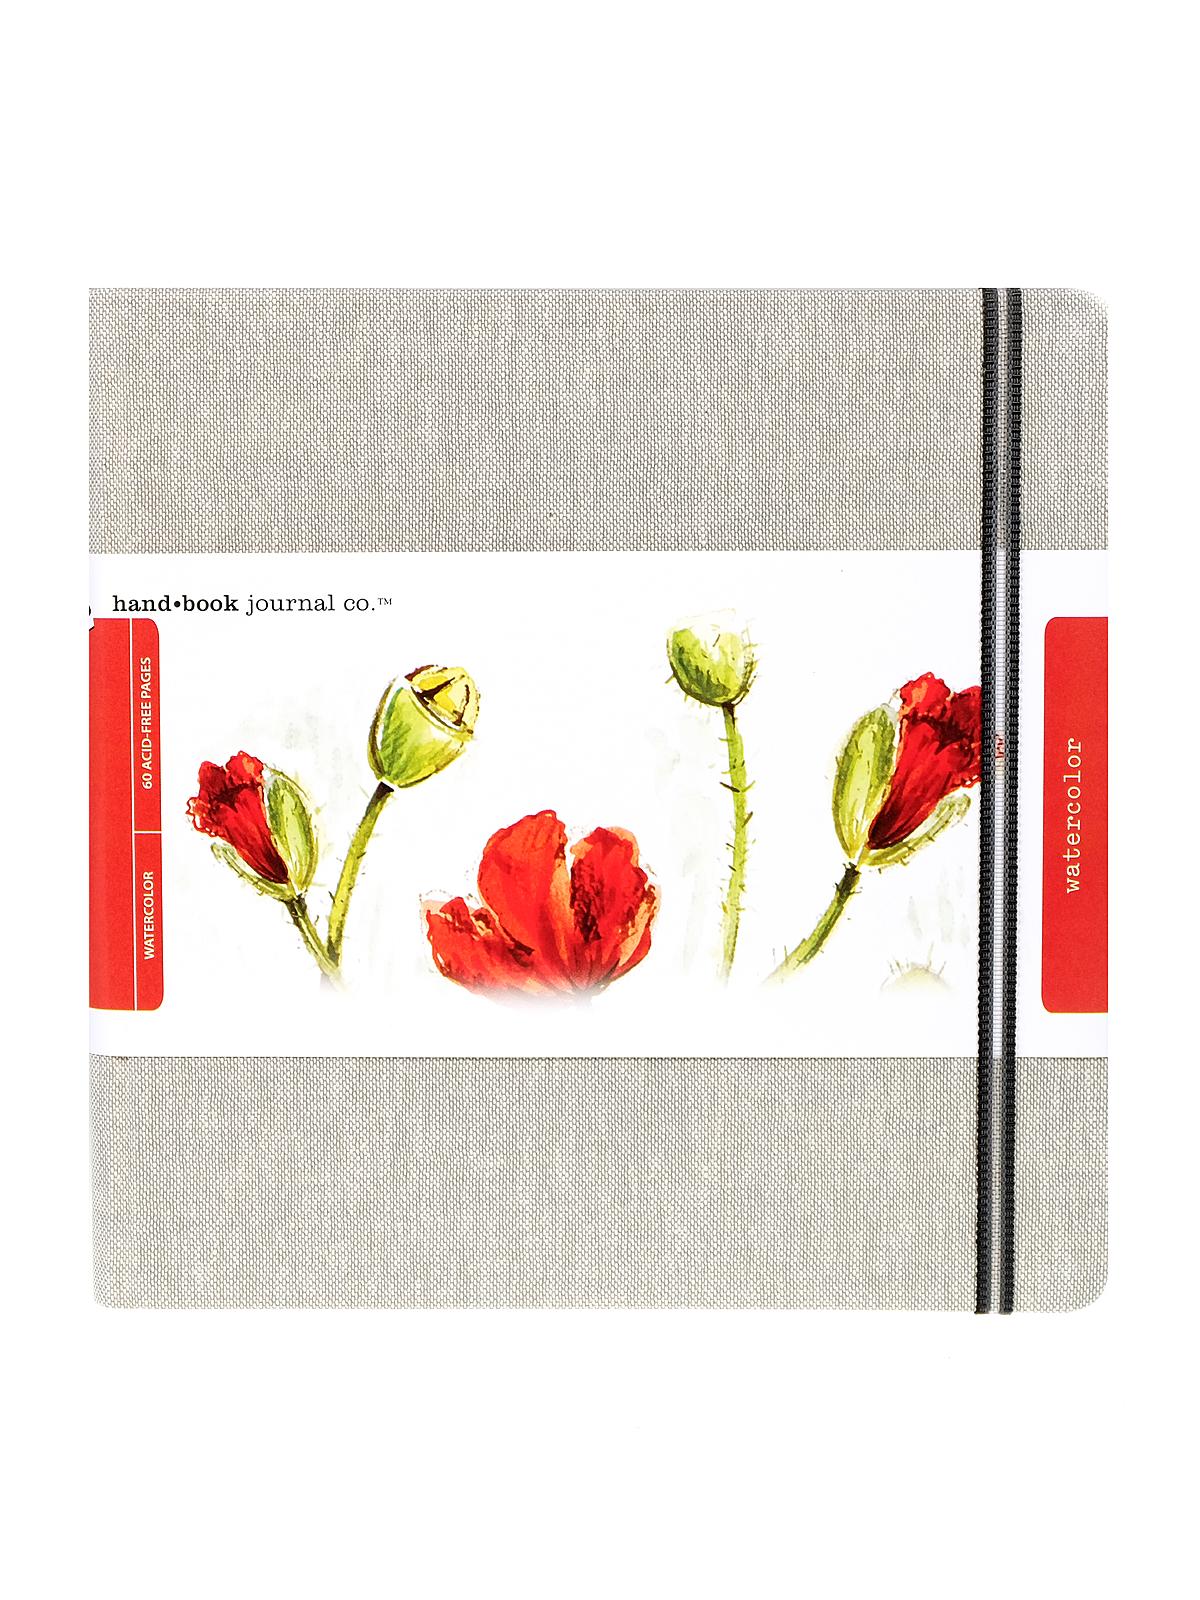 Travelogue Watercolor Journals Square 8 1 4 In. X 8 1 4 In. 90 Lb. (200 Gsm)